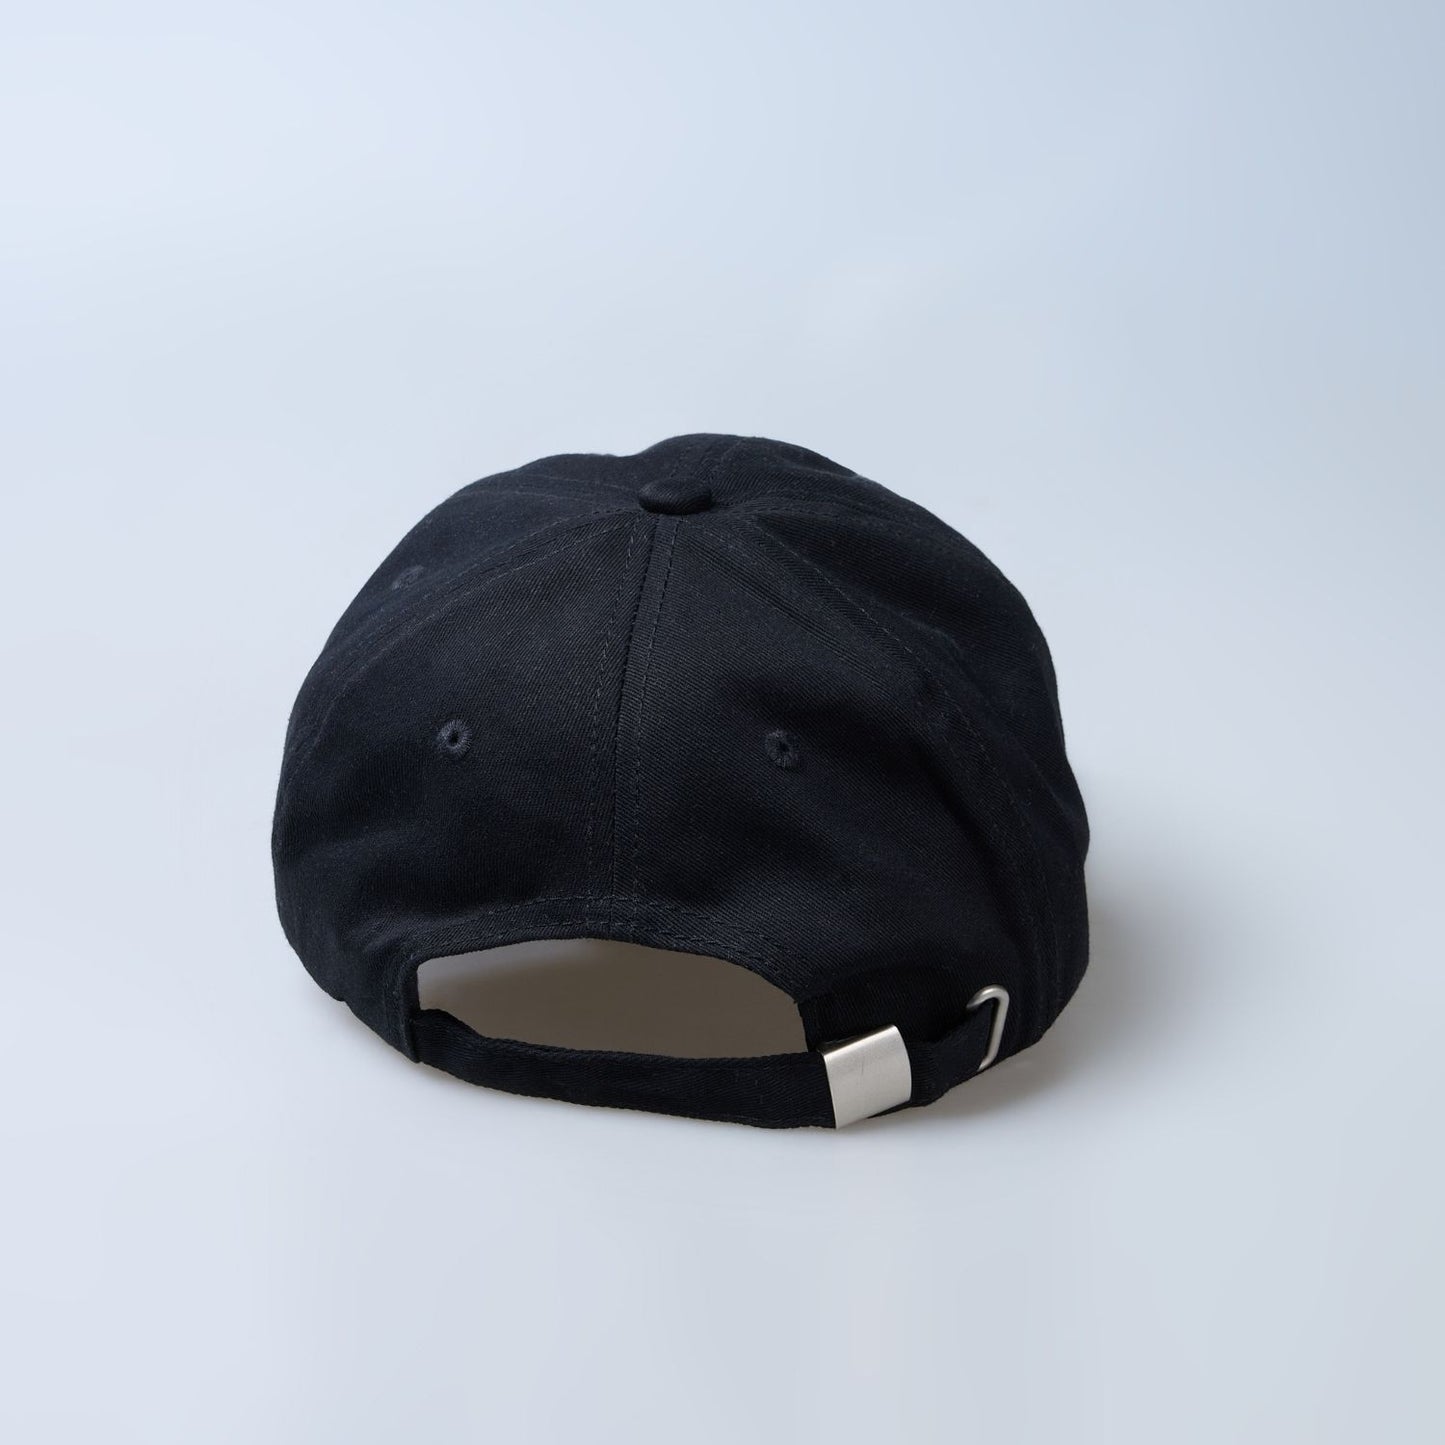 Back view of Black colored solid basic cap for men.